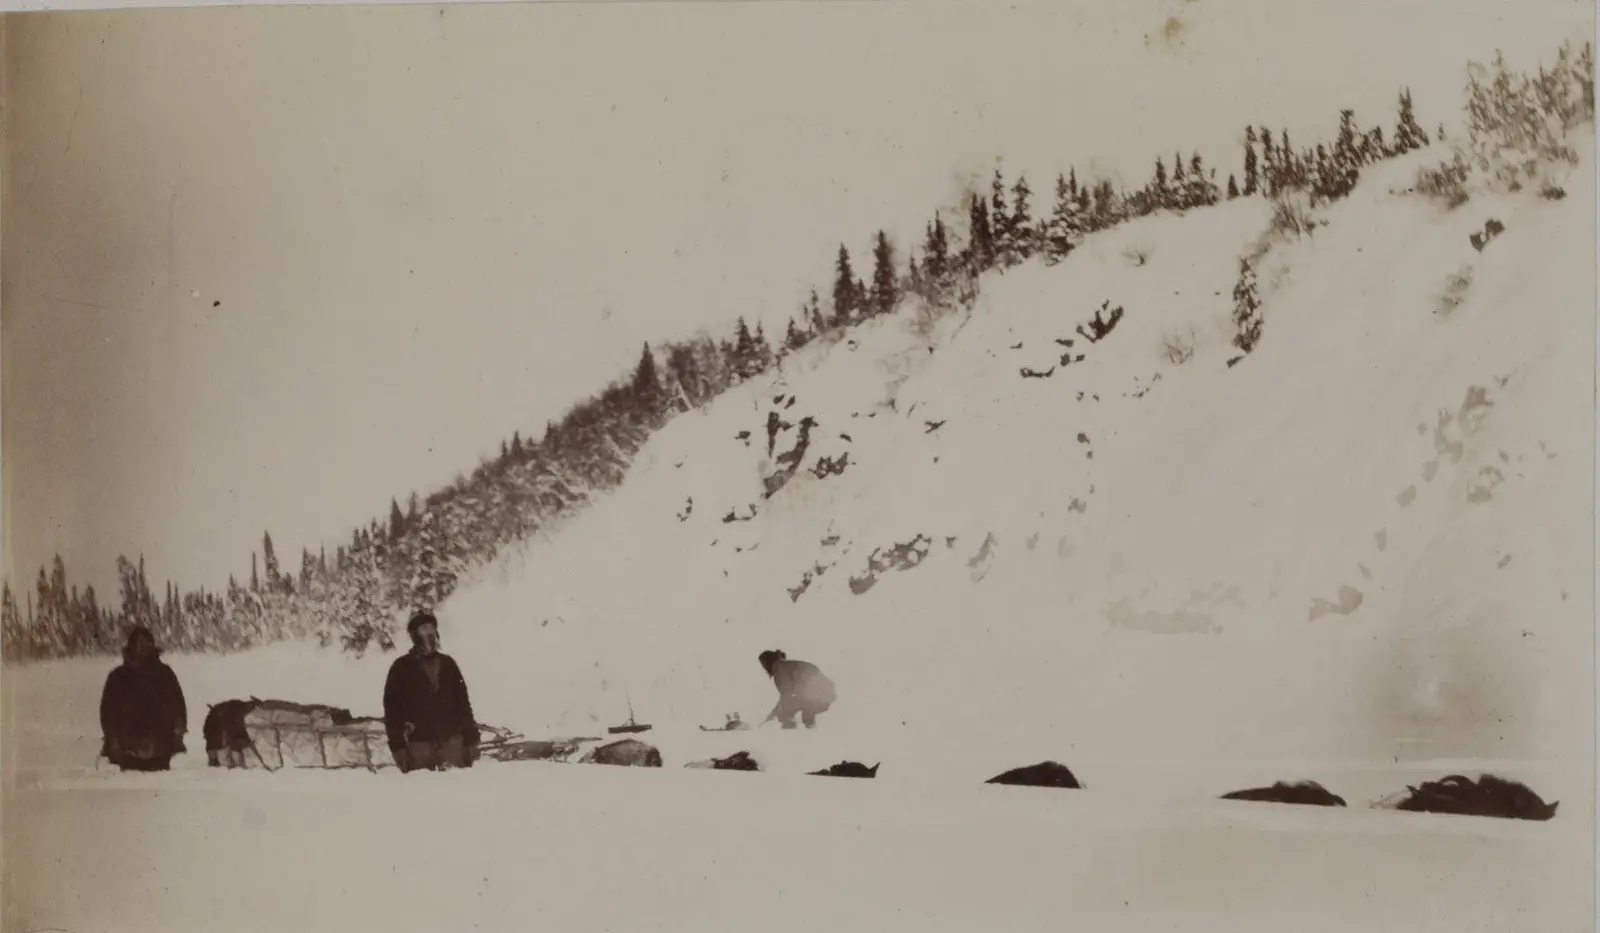 Black and white photograph of six dogs in a line pulling a sled through the snow. The snow mostly blocks the dogs from view, and only the tops of their backs and heads are visible. Three people are also in the photograph with the dogs.